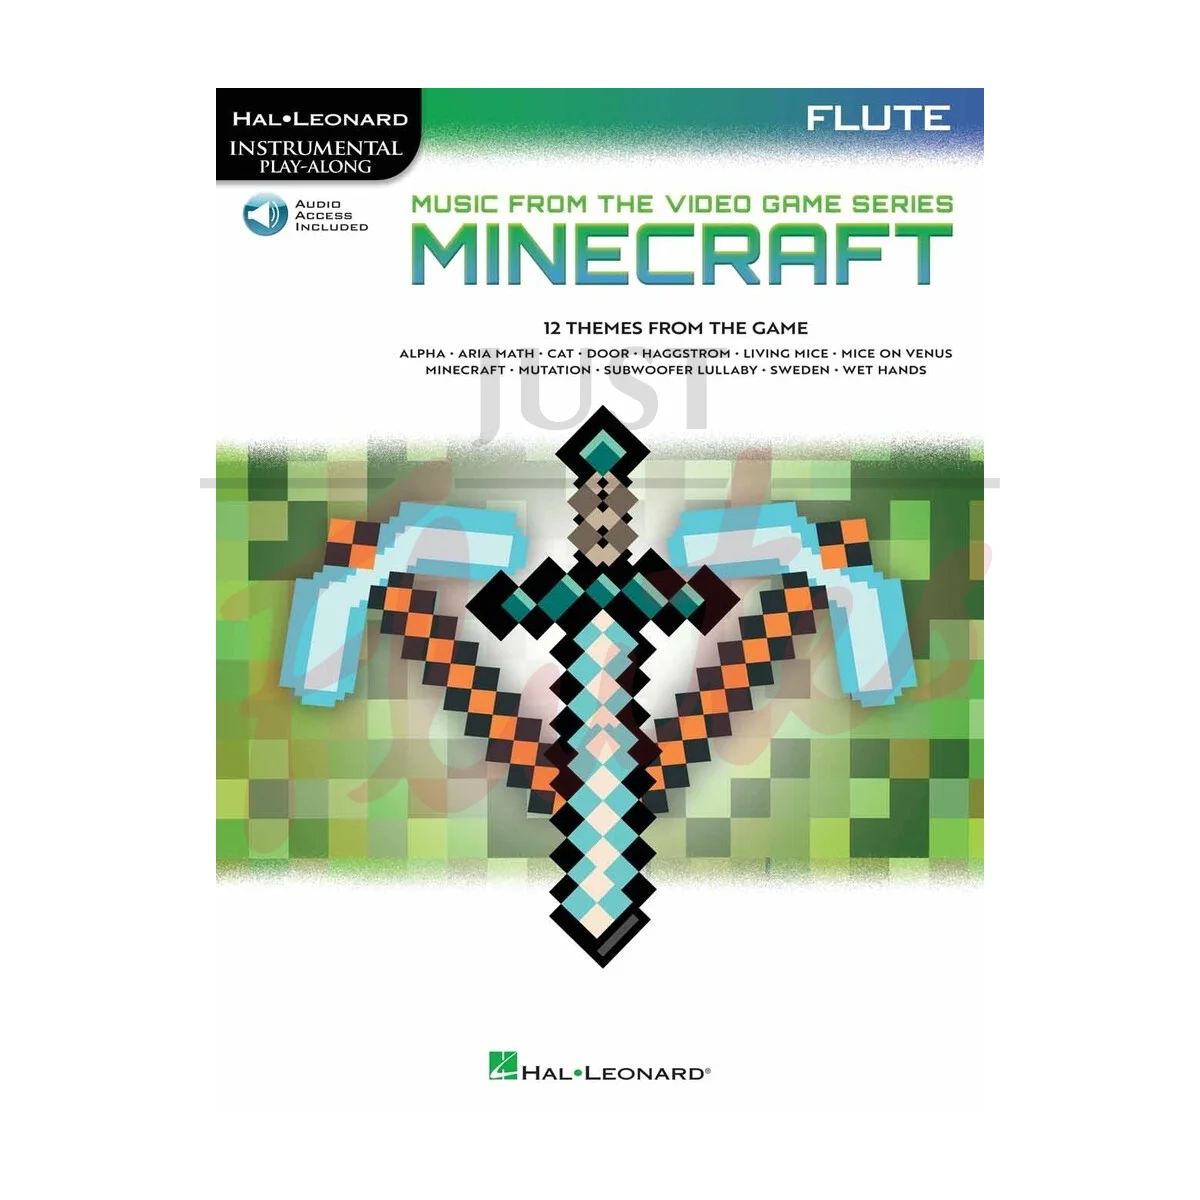 Music from the Video Game Series Minecraft for Flute